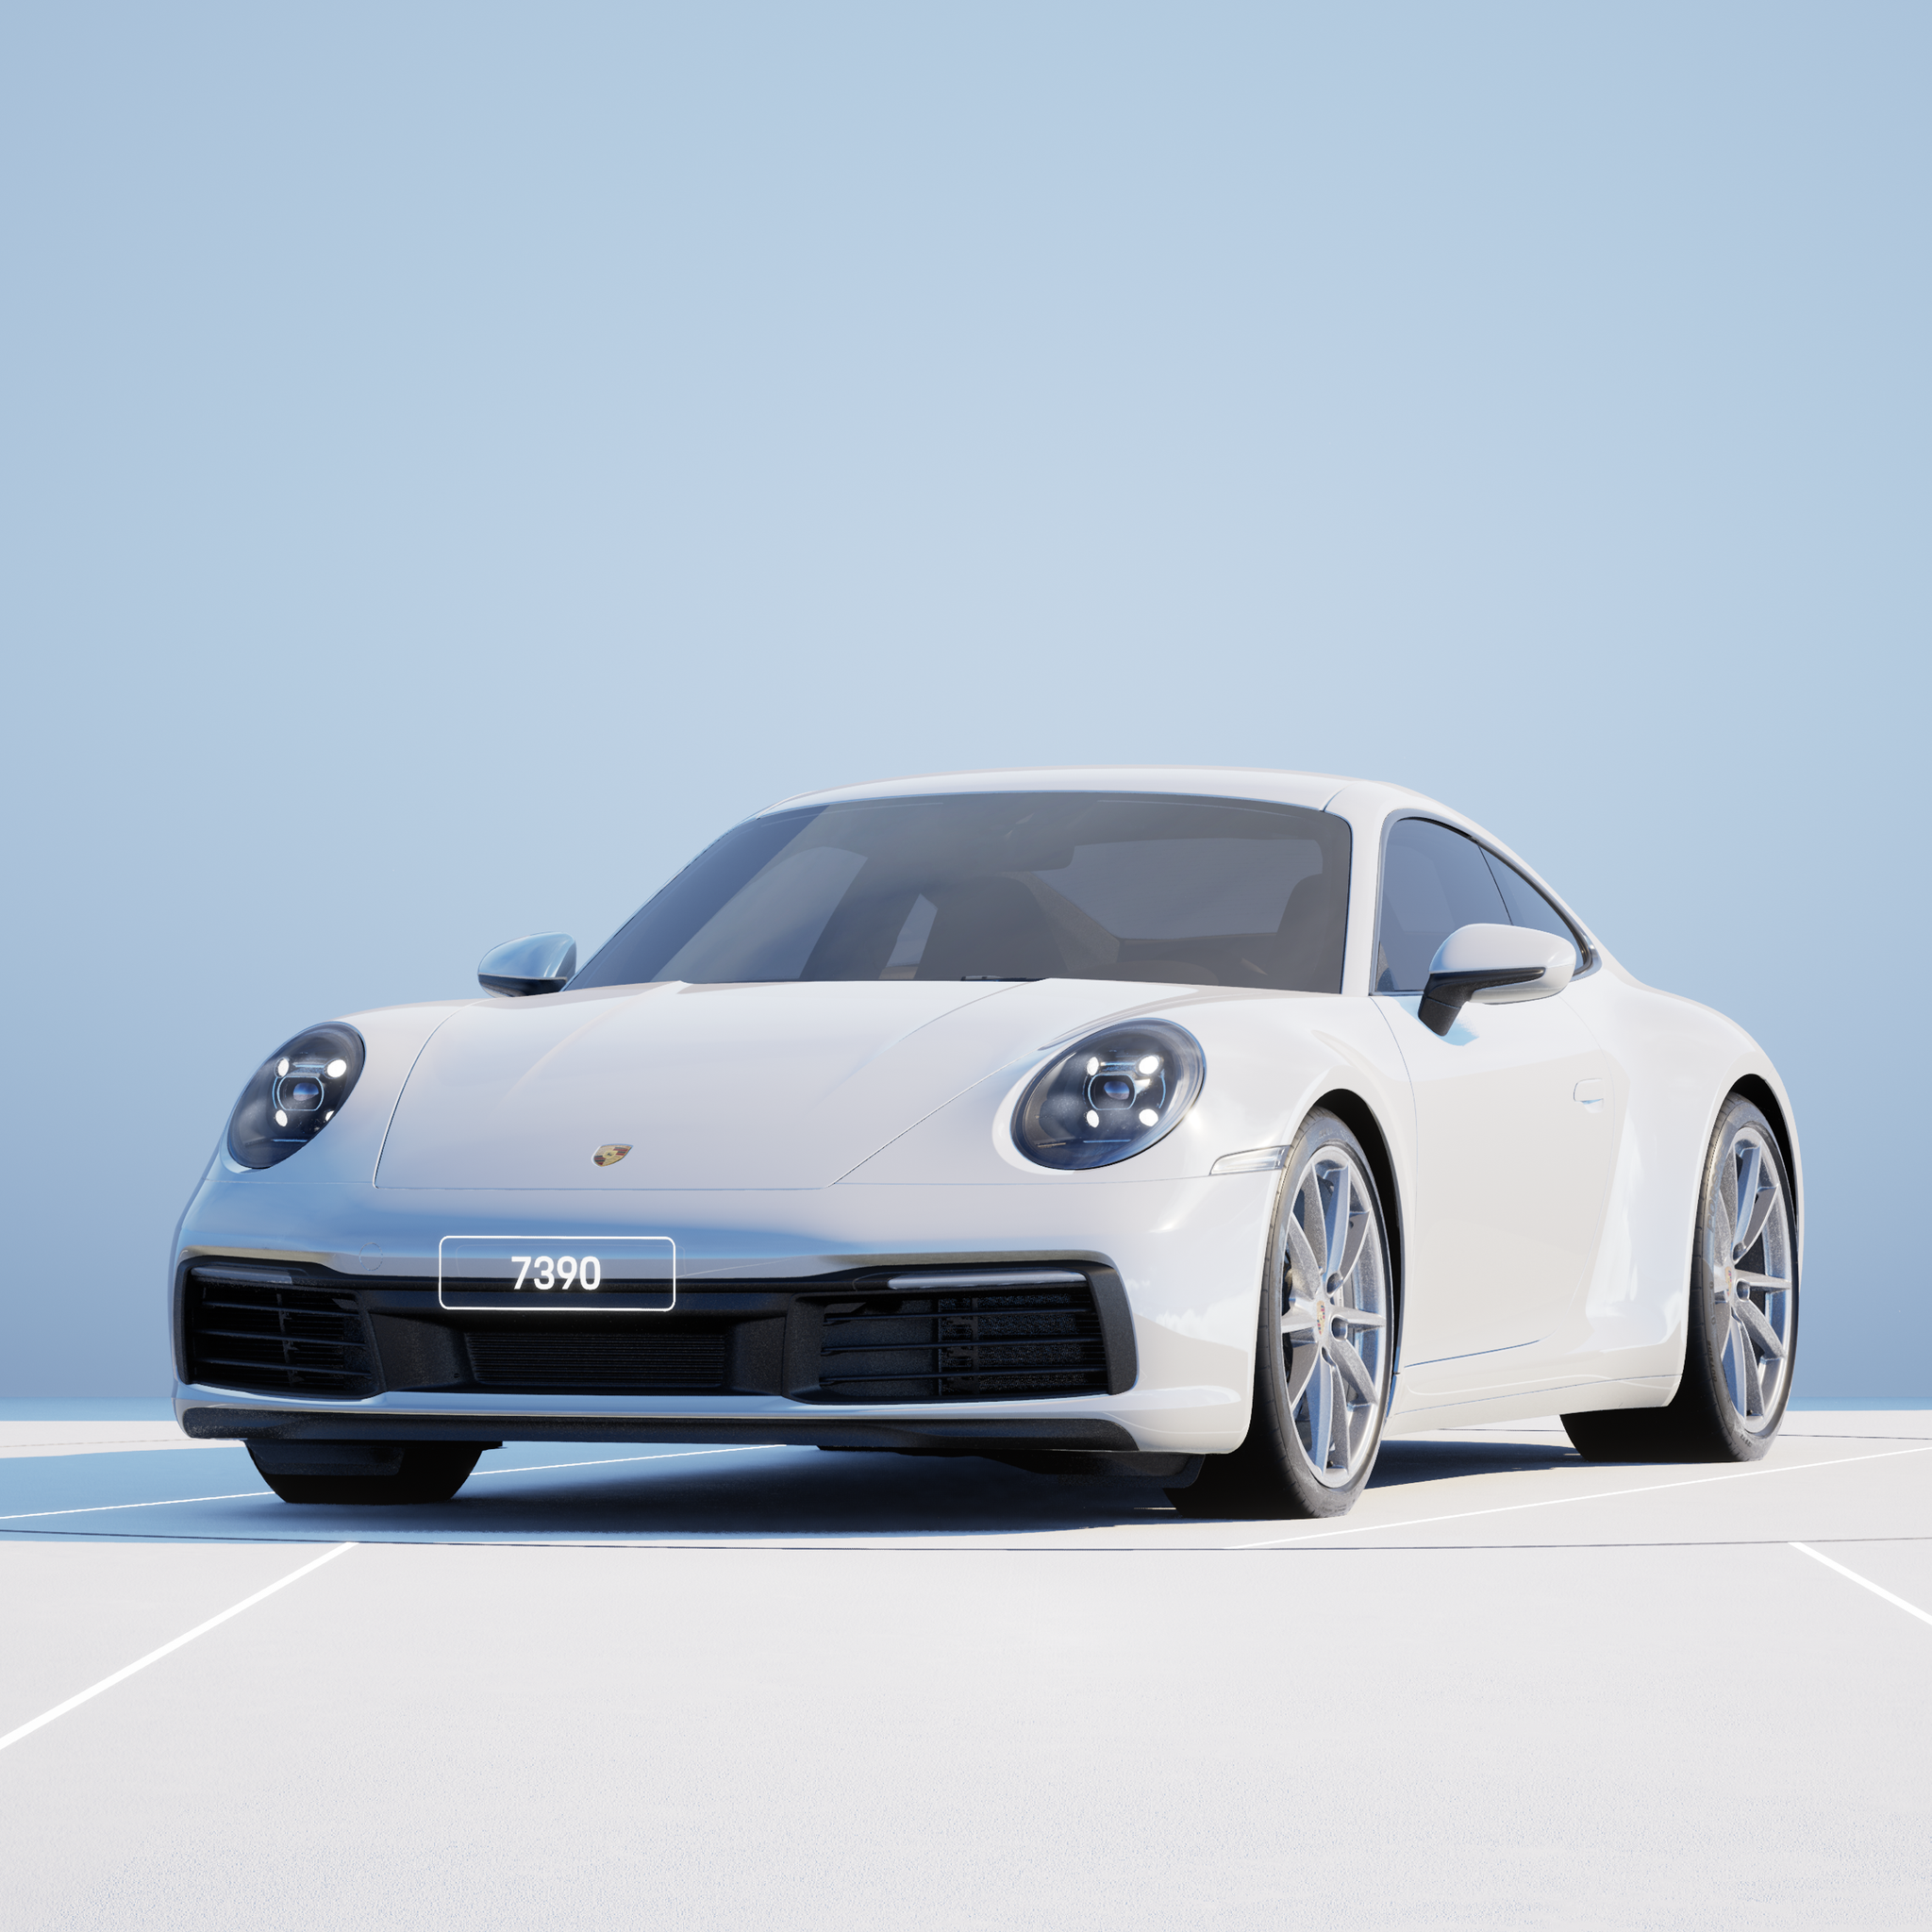 The PORSCHΞ 911 7390 image in phase